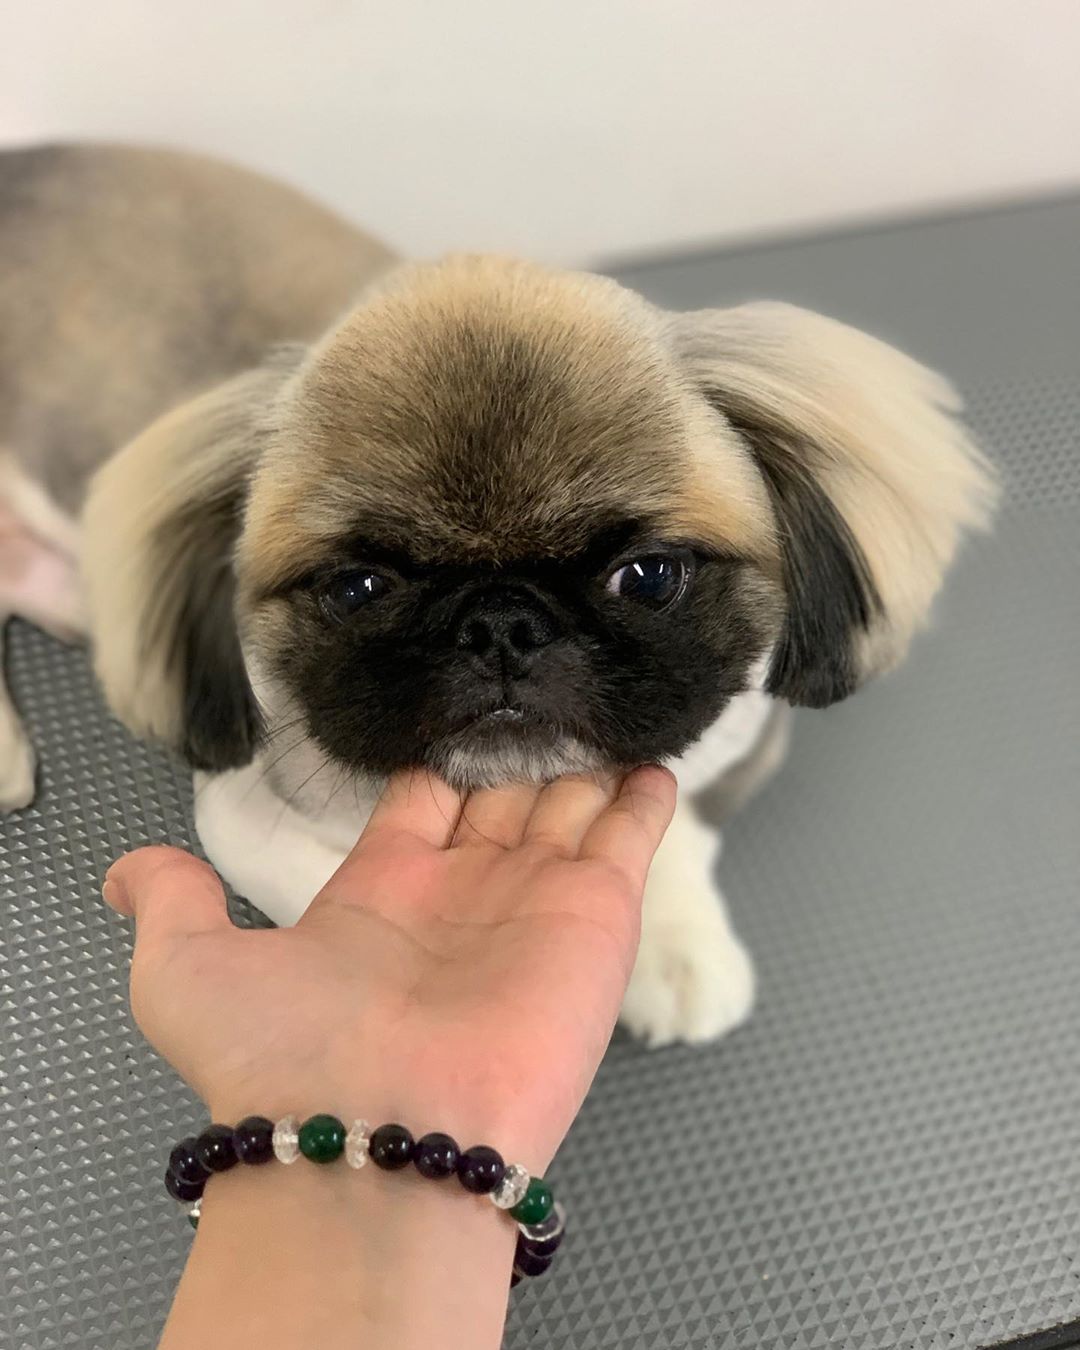 A Pekingese standing on the grooming table with its face on top of the hand of a person